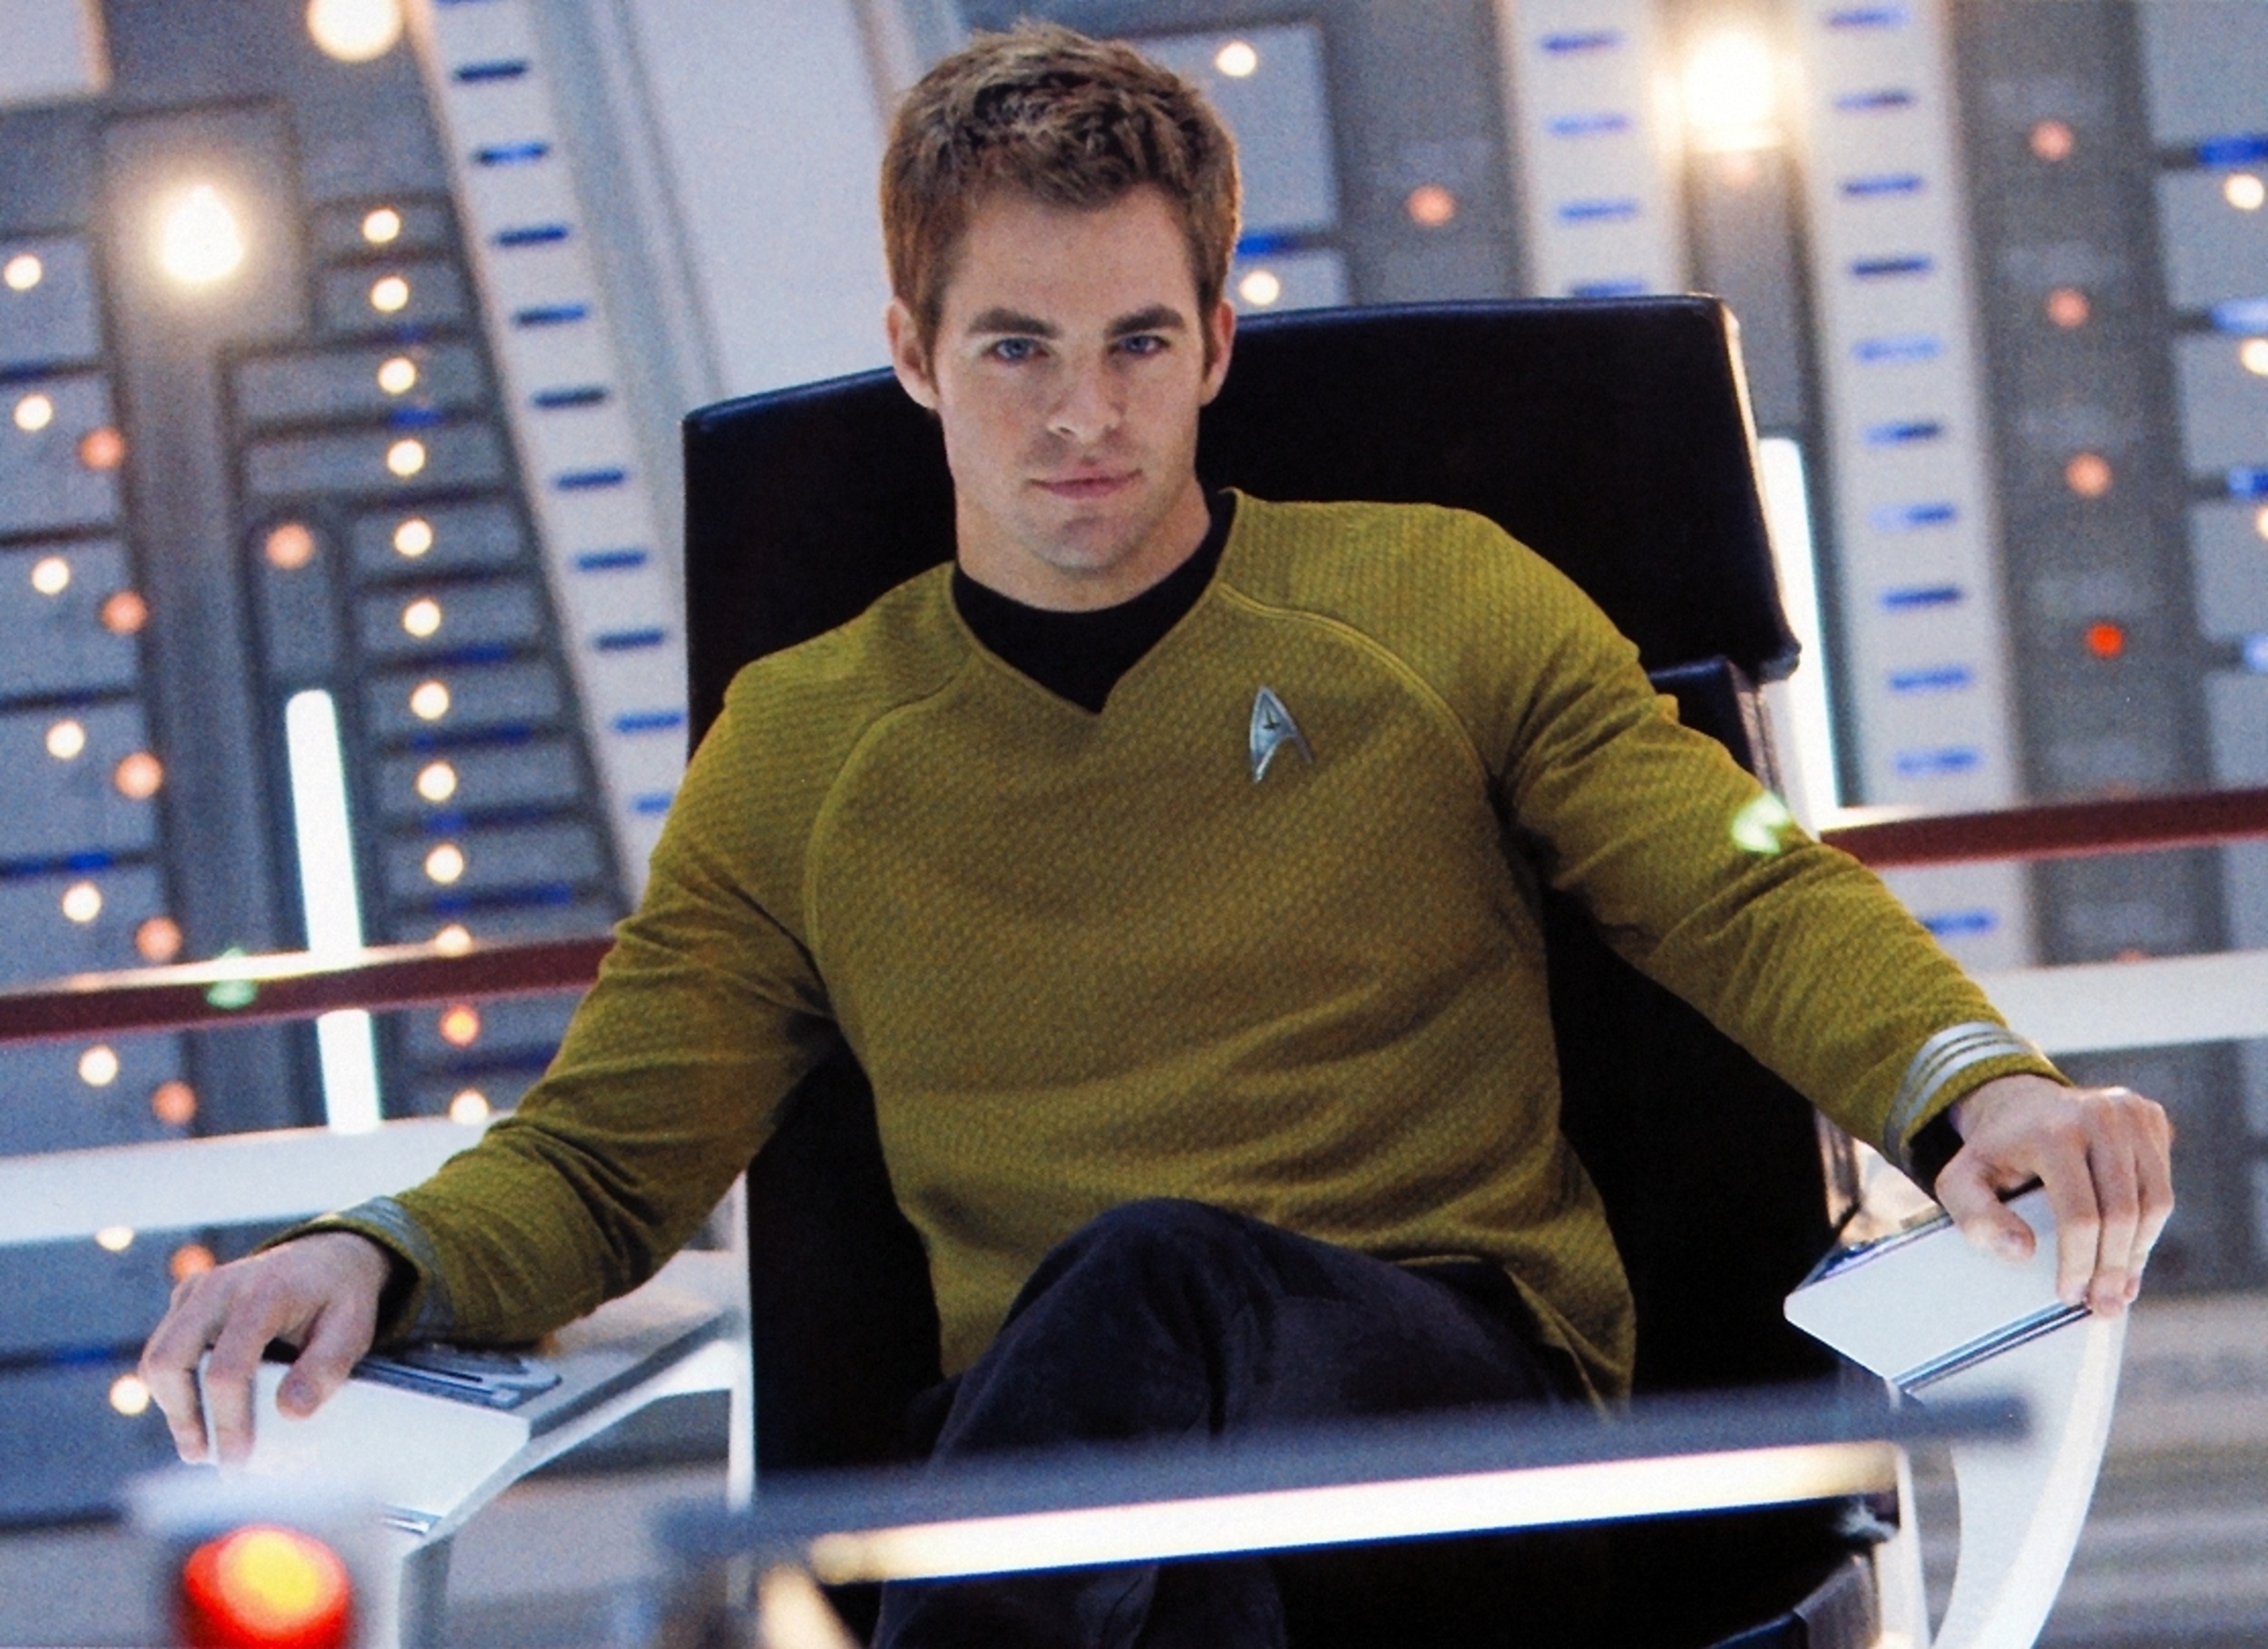 <p><em>Star Trek</em> had the biggest opening weekend of any film in the franchise, even adjusted for inflation. Made for a budget of $150 million, <em>Star Trek </em>made $385.7 million worldwide. Domestically, it was the seventh-highest-grossing movie of the year.</p><p>You may also like: <a href='https://www.yardbarker.com/entertainment/articles/bands_of_brothers_sibling_sonics_through_the_years/s1__26368838'>Bands of brothers: Sibling sonics through the years</a></p>